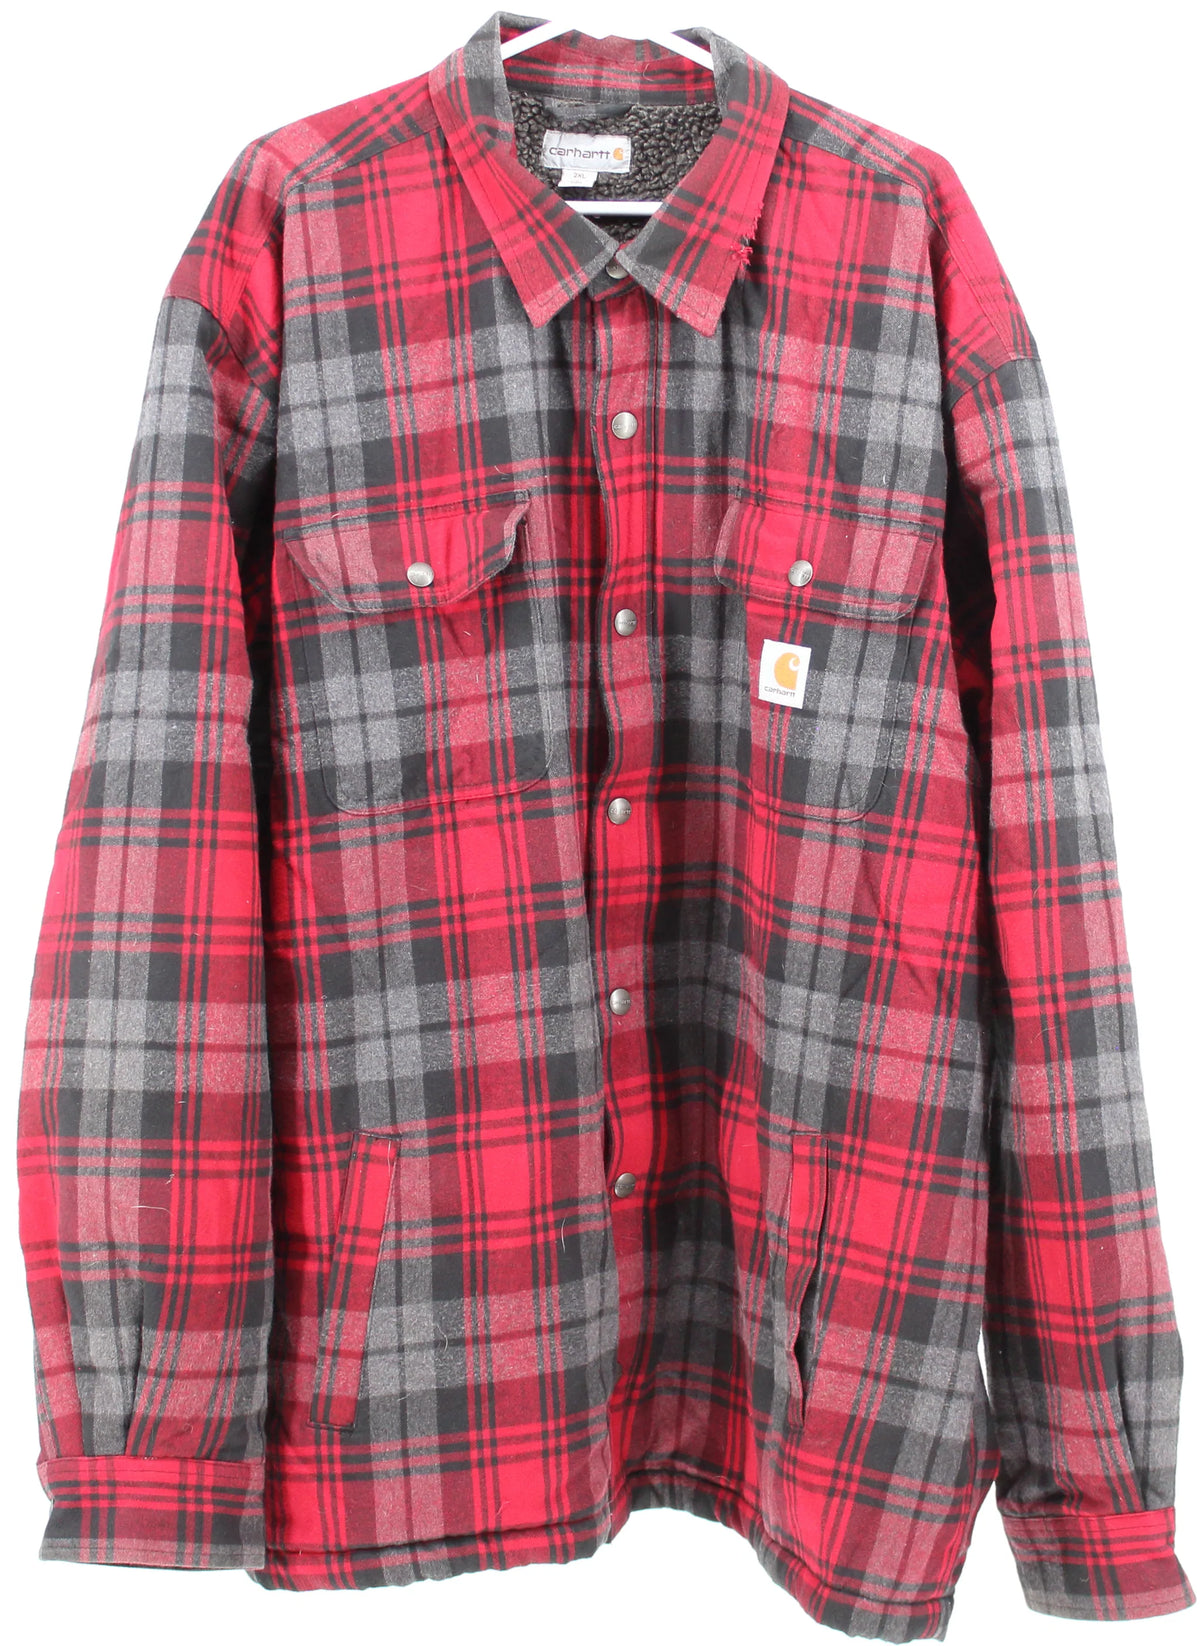 Carhartt Red and Black Plaid Sherpa Lined Shirt